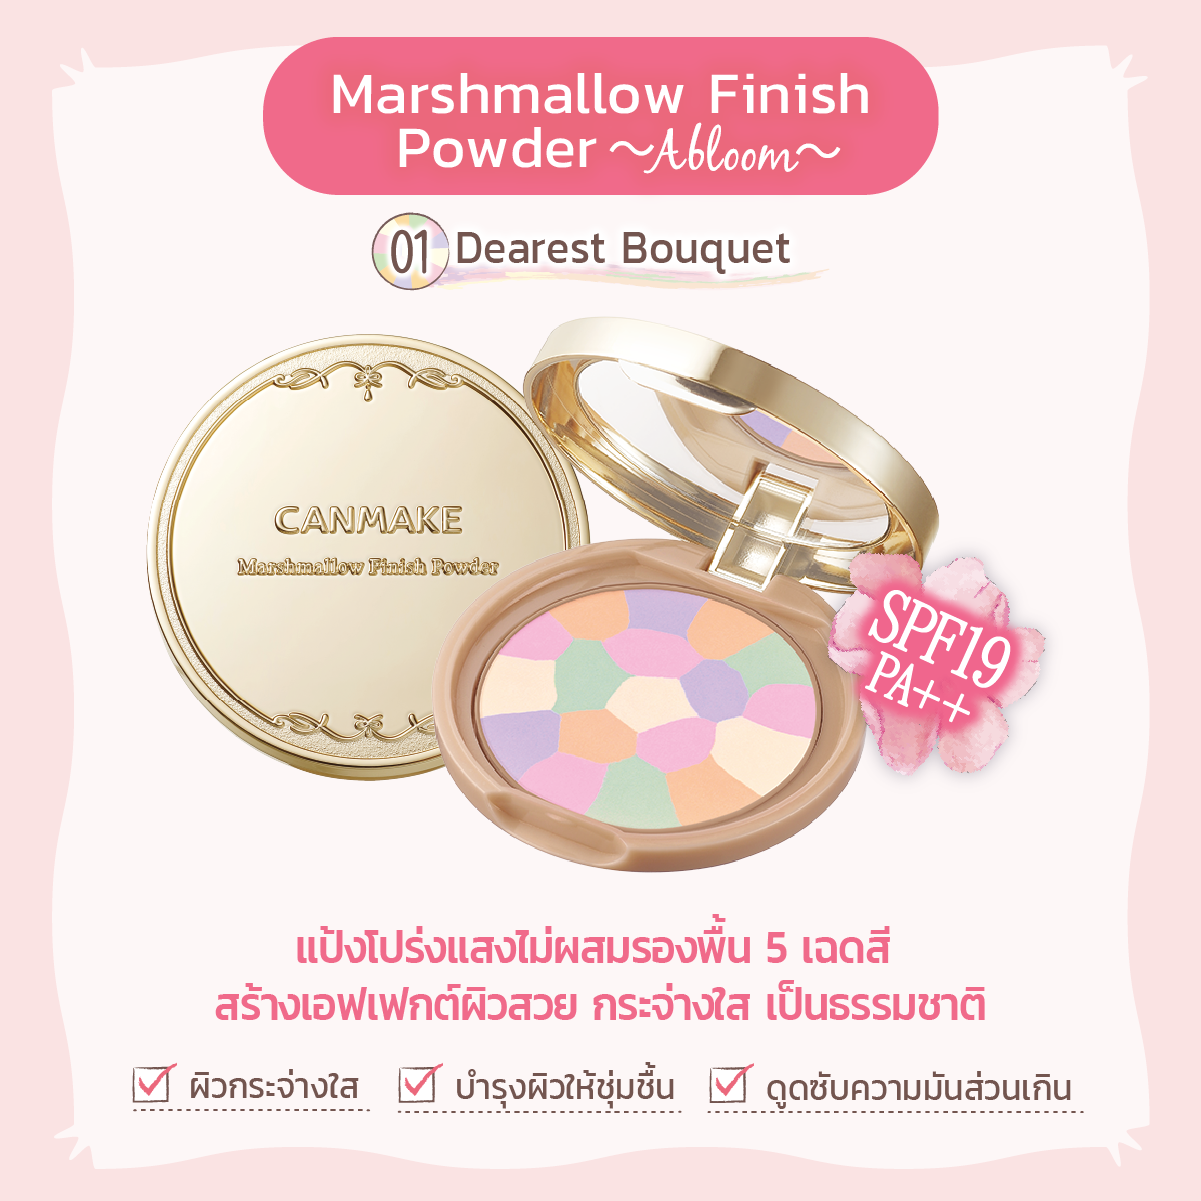 Canmake Marshmallow Finish Power Abloom 